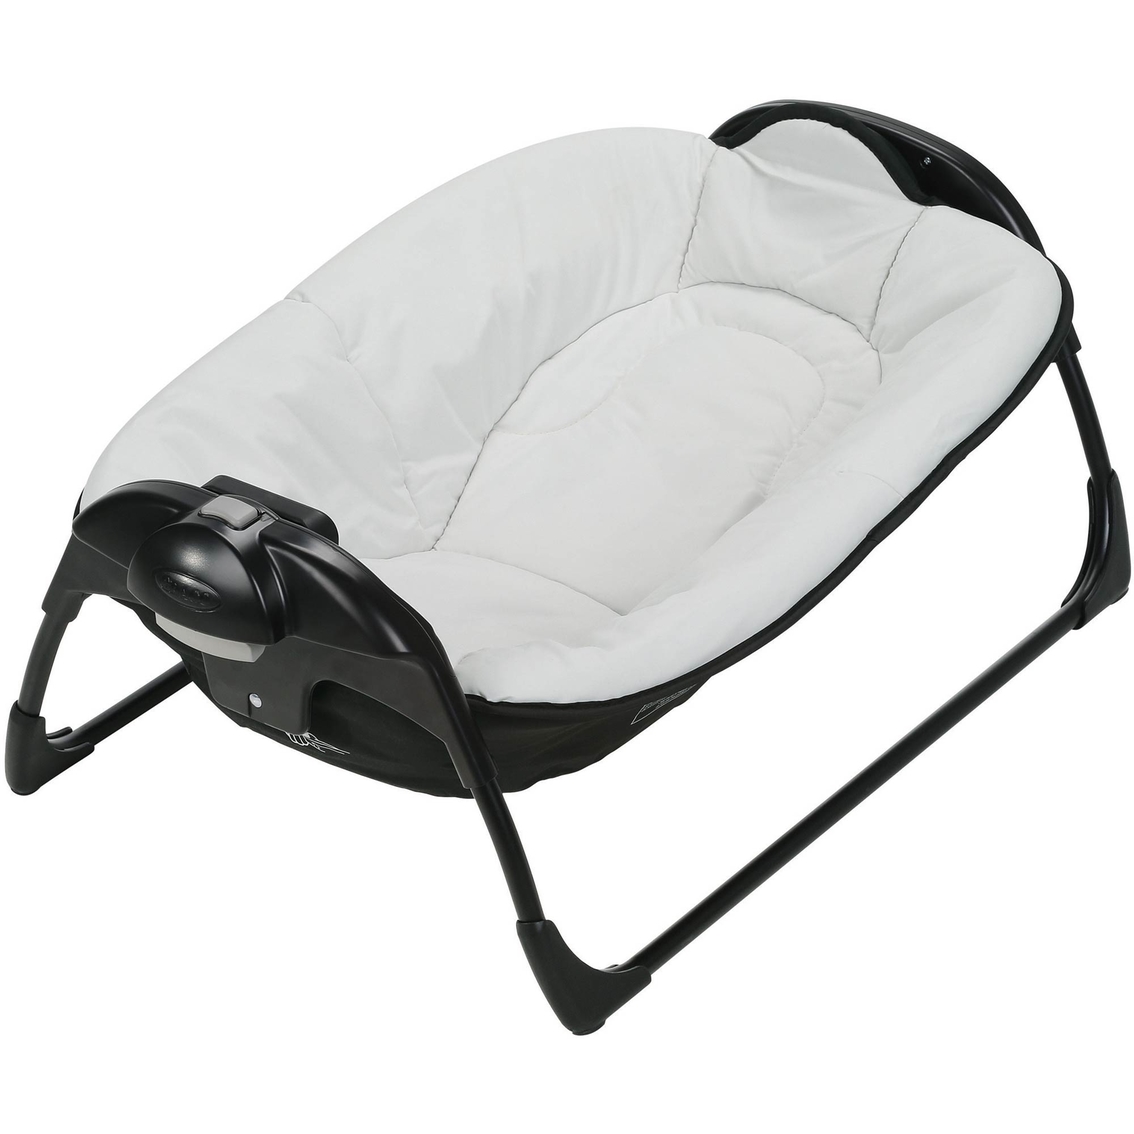 Graco Pack 'n Play Portable Napper and Changer Playard - Image 4 of 4